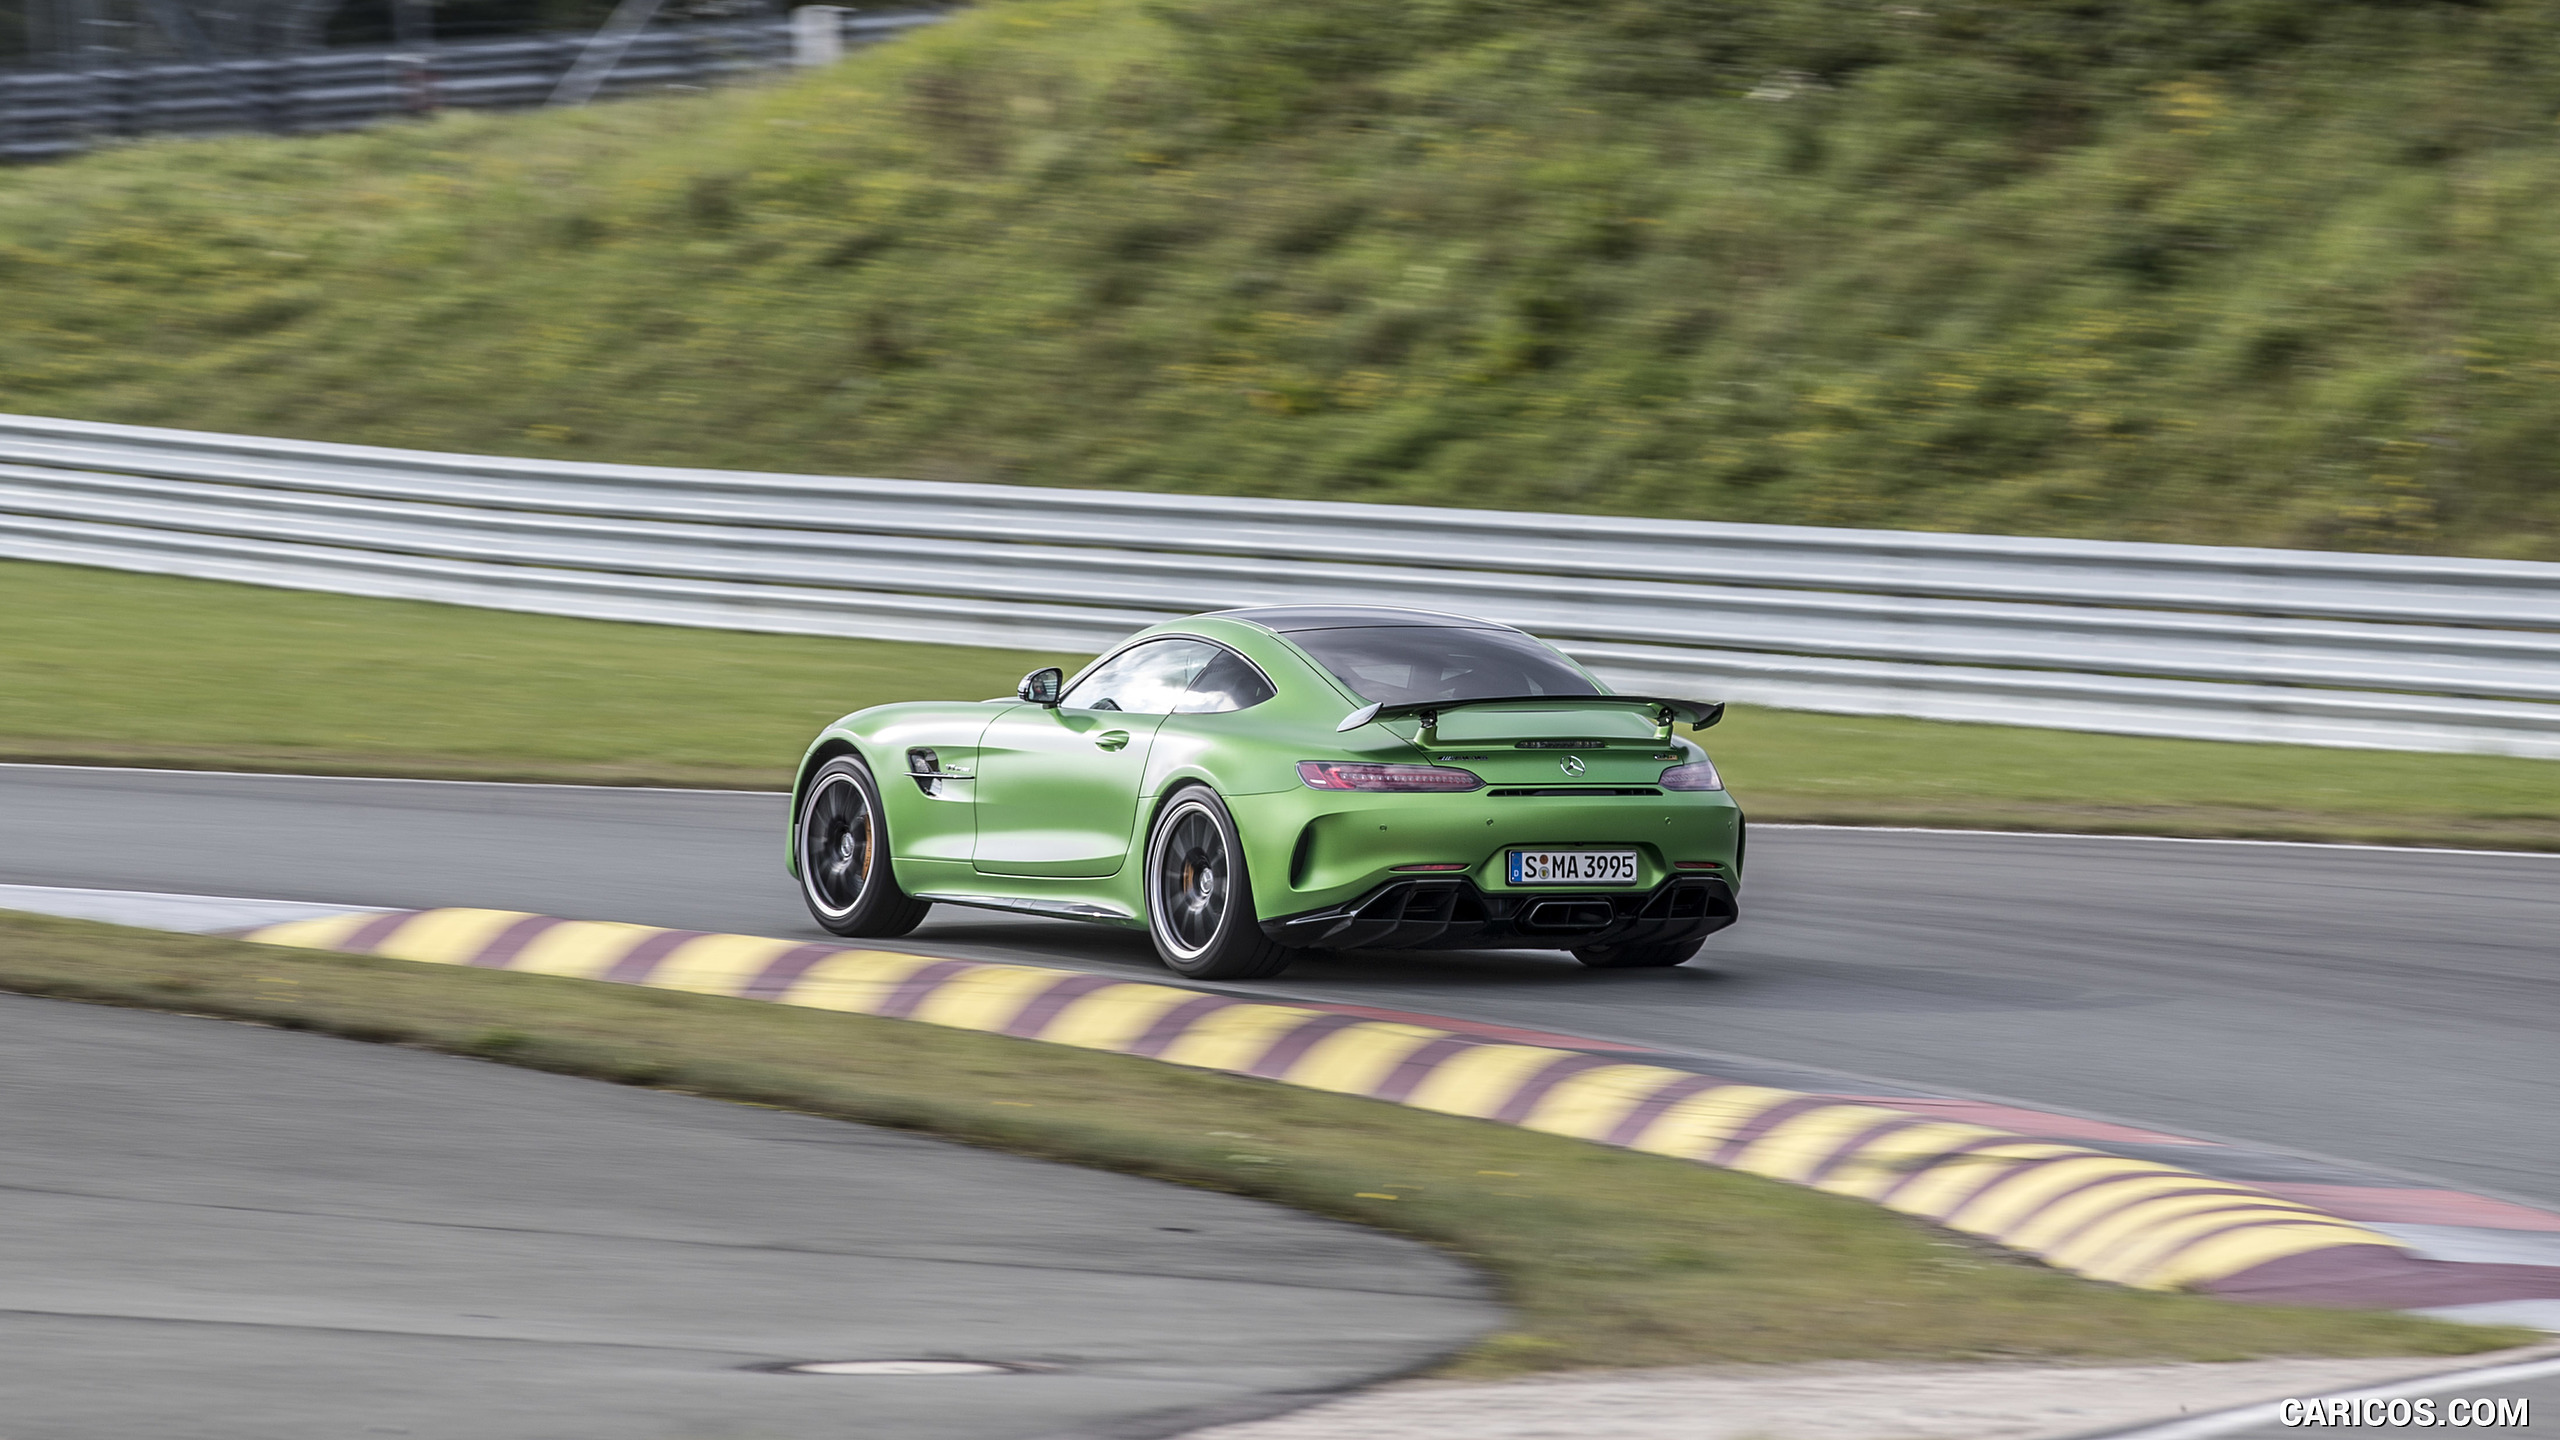 2017 Mercedes-AMG GT R Coupe - Rear Three-Quarter, #156 of 182